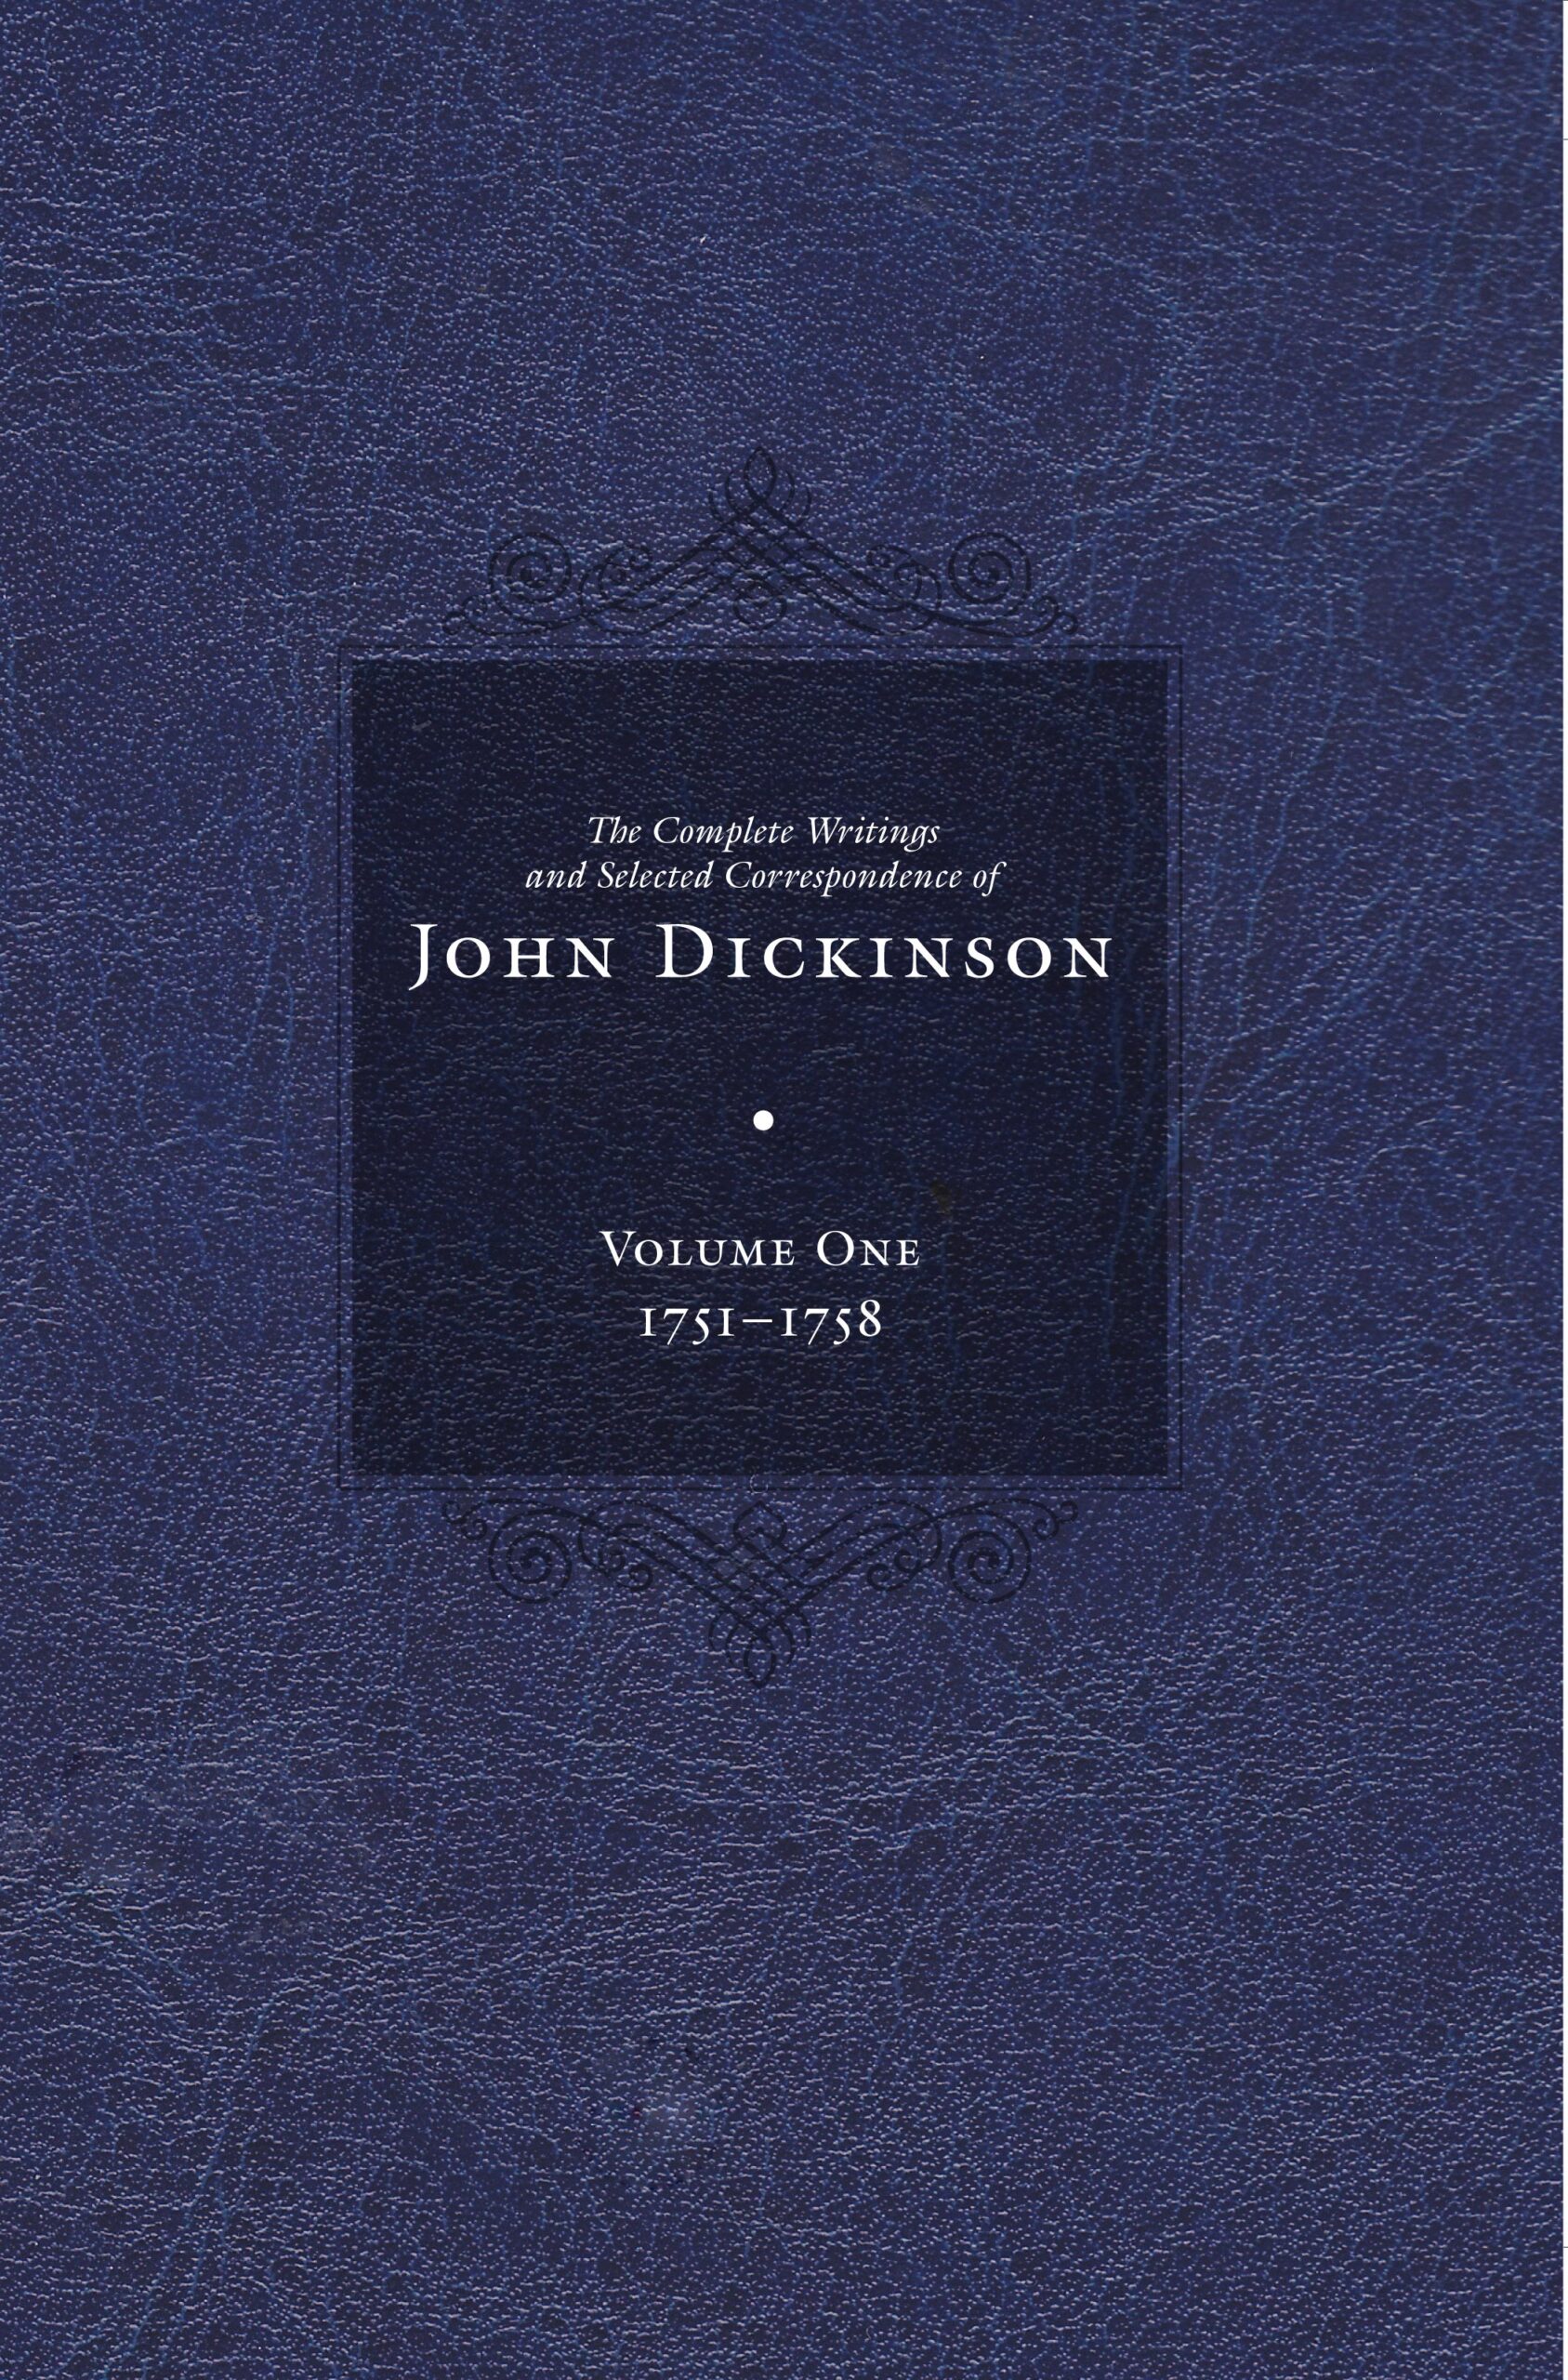 The first two volumes of <em>The Complete Writings and Selected Correspondence of John Dickinson</em> are out now!